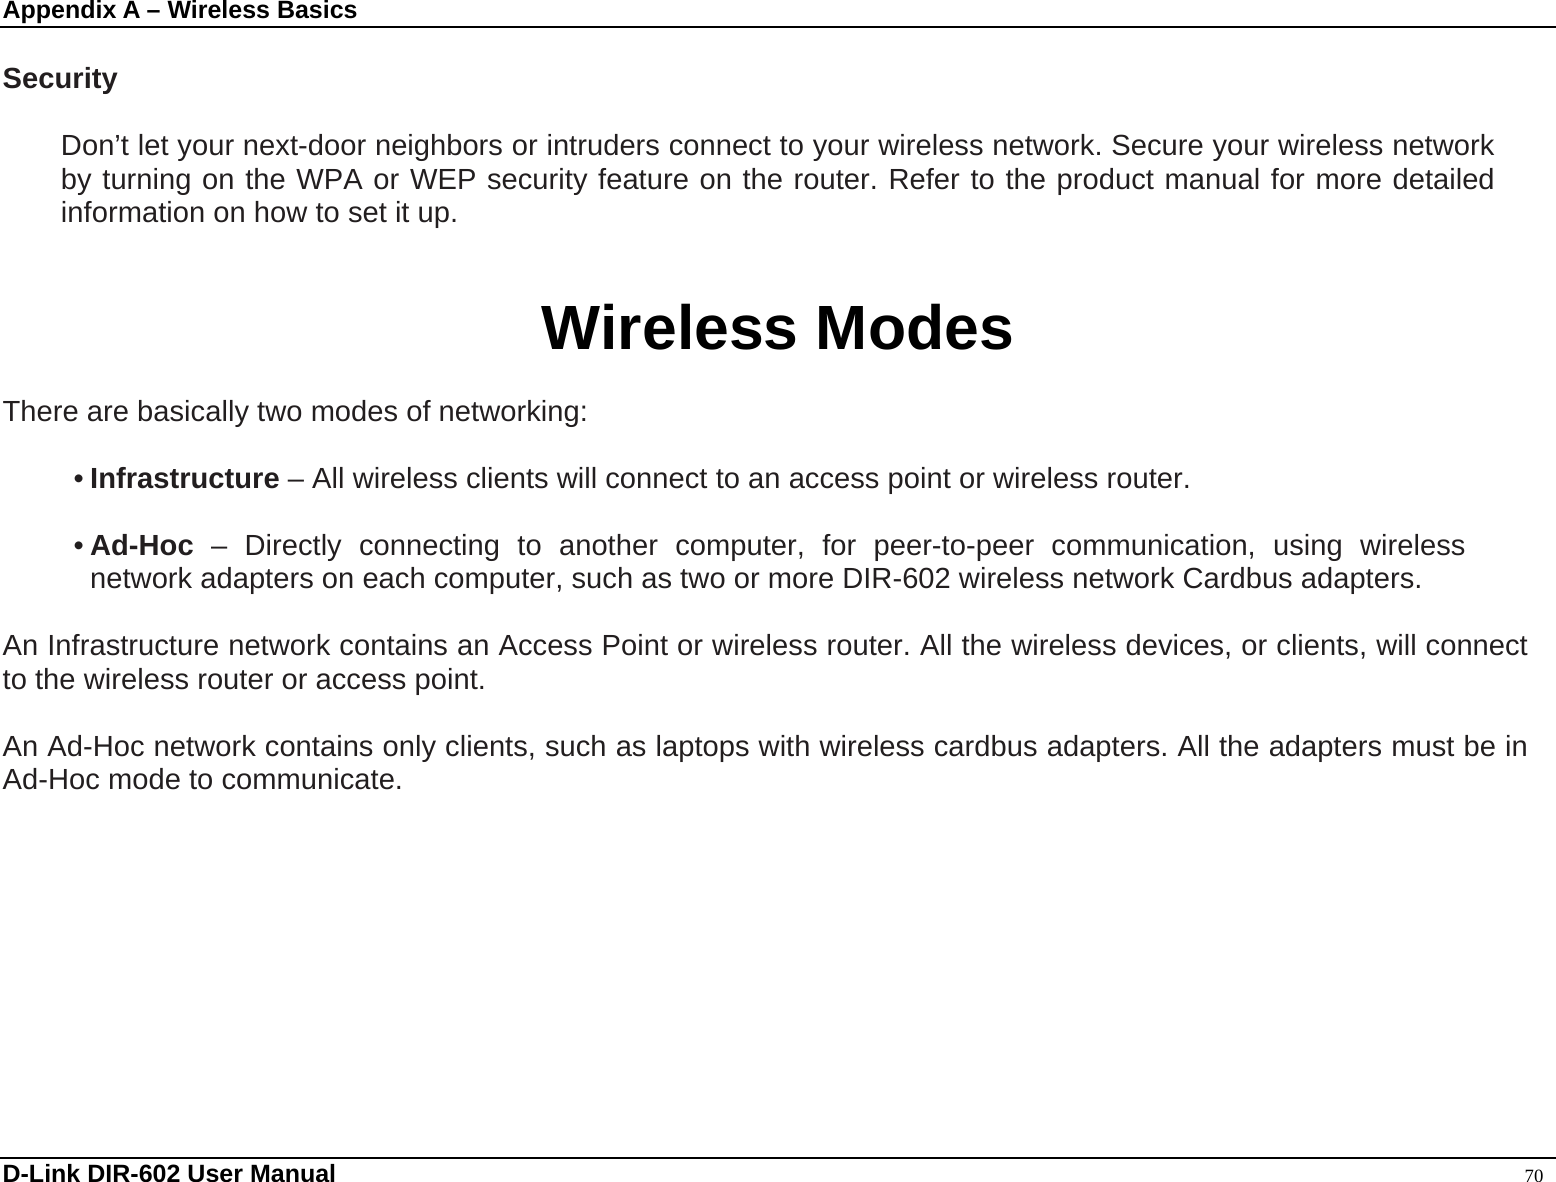 Appendix A – Wireless Basics  D-Link DIR-602 User Manual                                                                                               70  Security      Don’t let your next-door neighbors or intruders connect to your wireless network. Secure your wireless network by turning on the WPA or WEP security feature on the router. Refer to the product manual for more detailed information on how to set it up.   Wireless Modes  There are basically two modes of networking:    • Infrastructure – All wireless clients will connect to an access point or wireless router.  • Ad-Hoc – Directly connecting to another computer, for peer-to-peer communication, using wireless network adapters on each computer, such as two or more DIR-602 wireless network Cardbus adapters.  An Infrastructure network contains an Access Point or wireless router. All the wireless devices, or clients, will connect to the wireless router or access point.    An Ad-Hoc network contains only clients, such as laptops with wireless cardbus adapters. All the adapters must be in Ad-Hoc mode to communicate.  